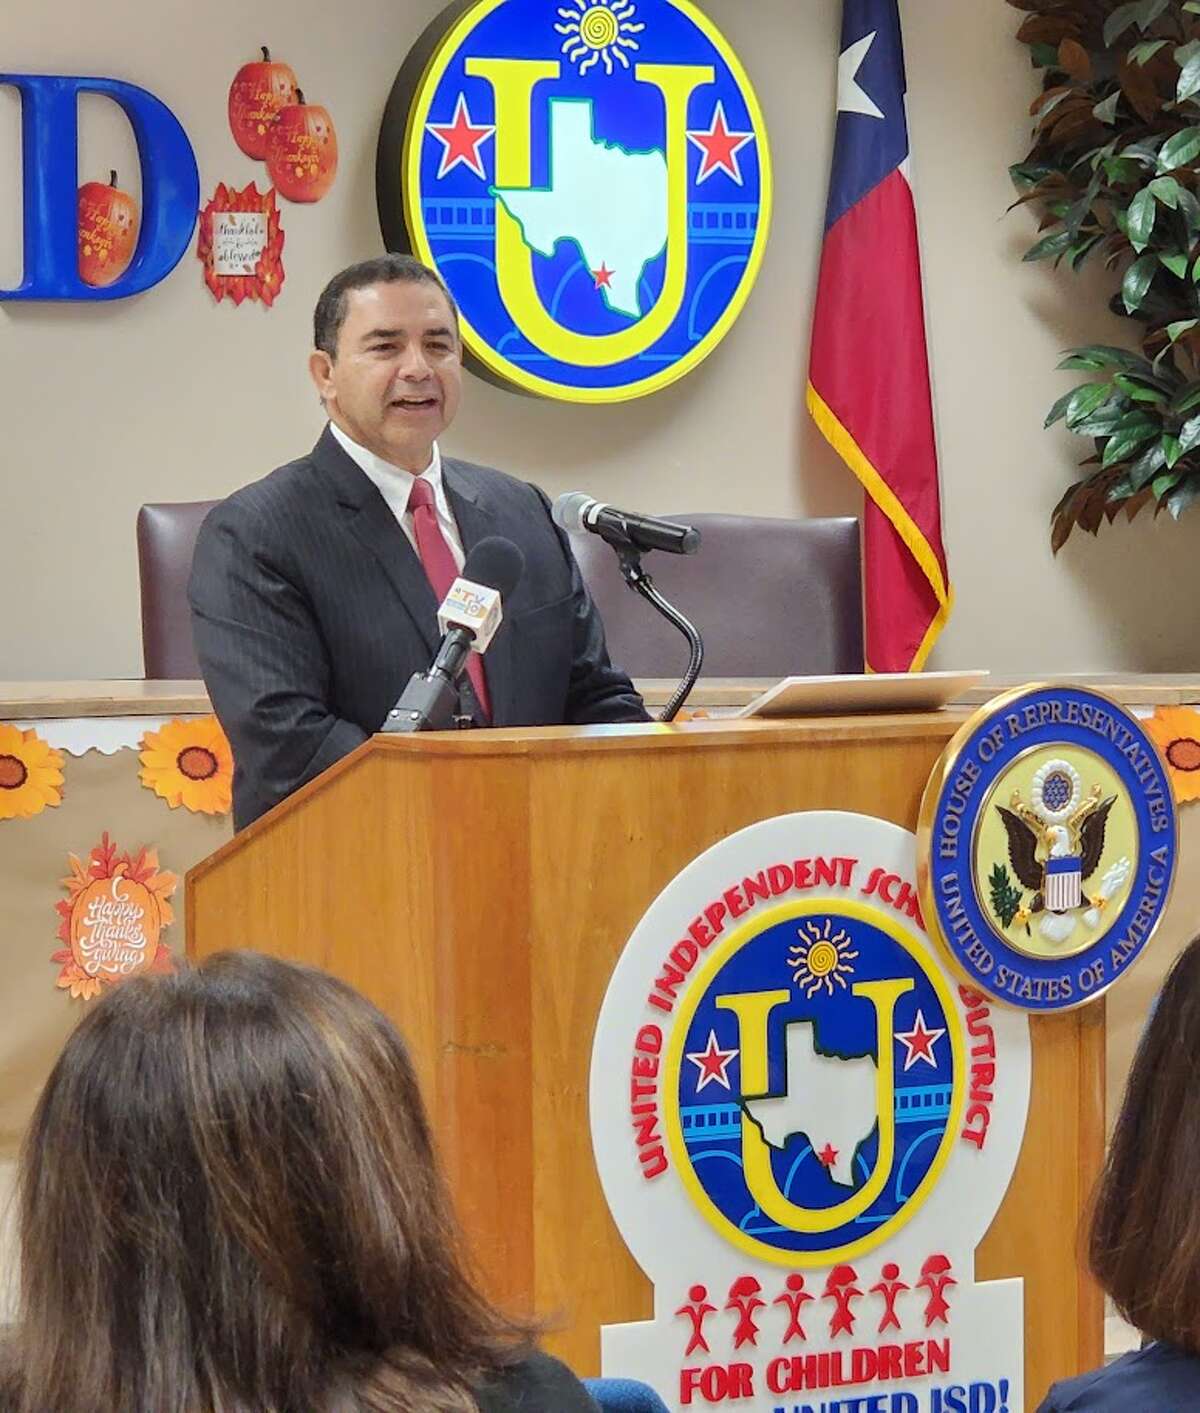 Rep. Henry Cuellar speaks at a press conference Friday, Nov. 18 announcing $10.3 million in funding for Laredo school districts to address the digital divide.